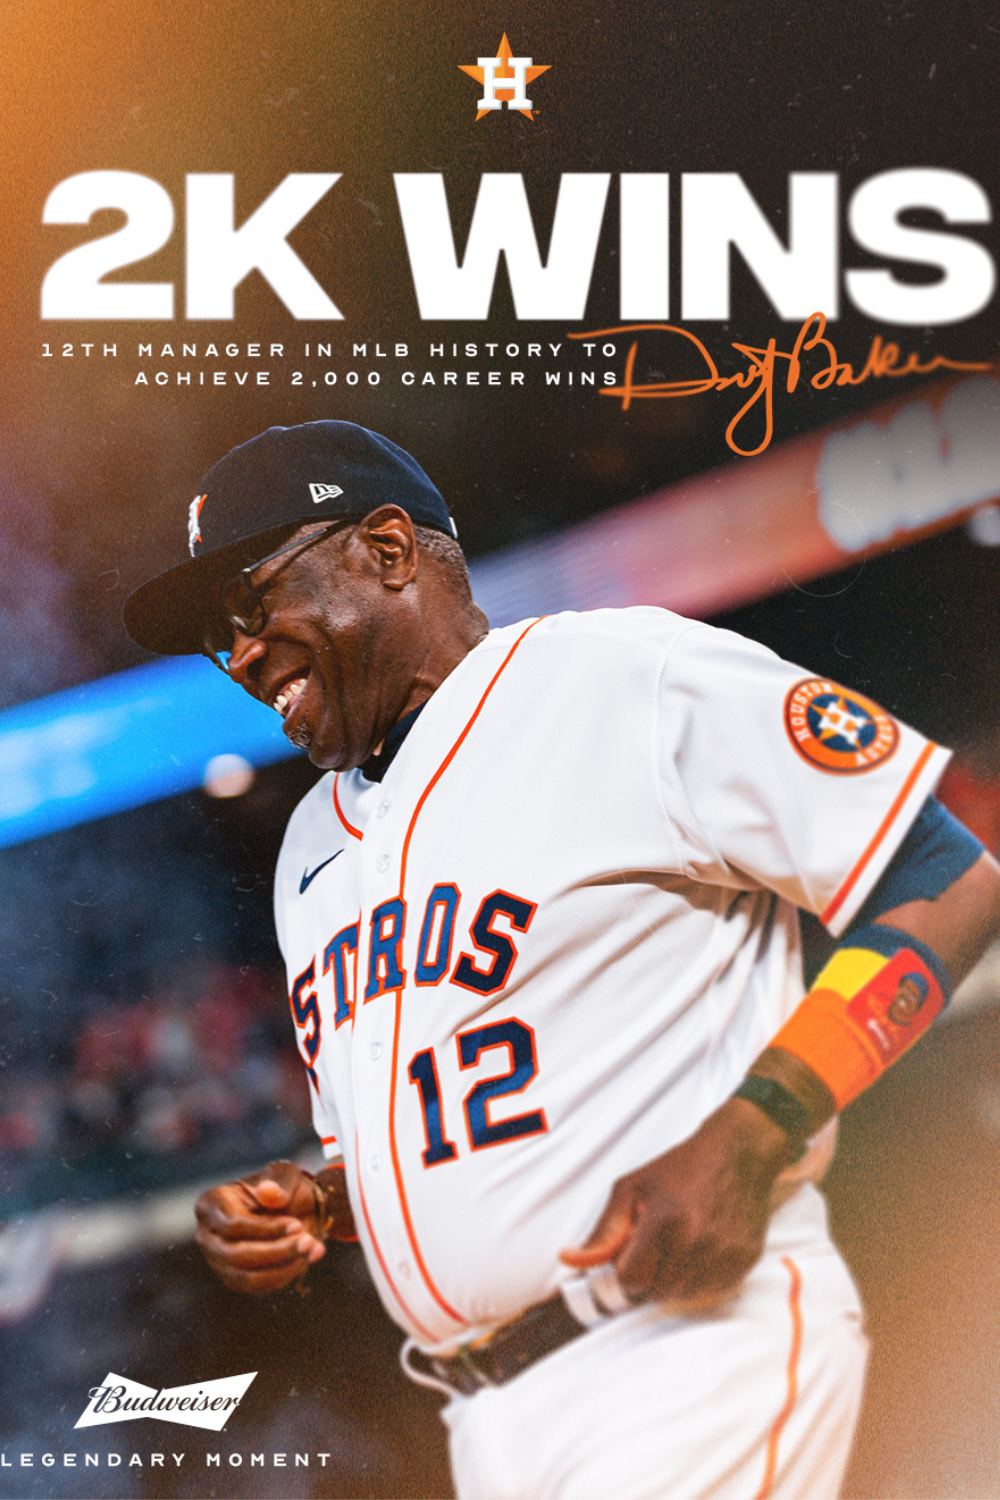 Baker Is The First African-American Manager To Reach 2000 Career Wins